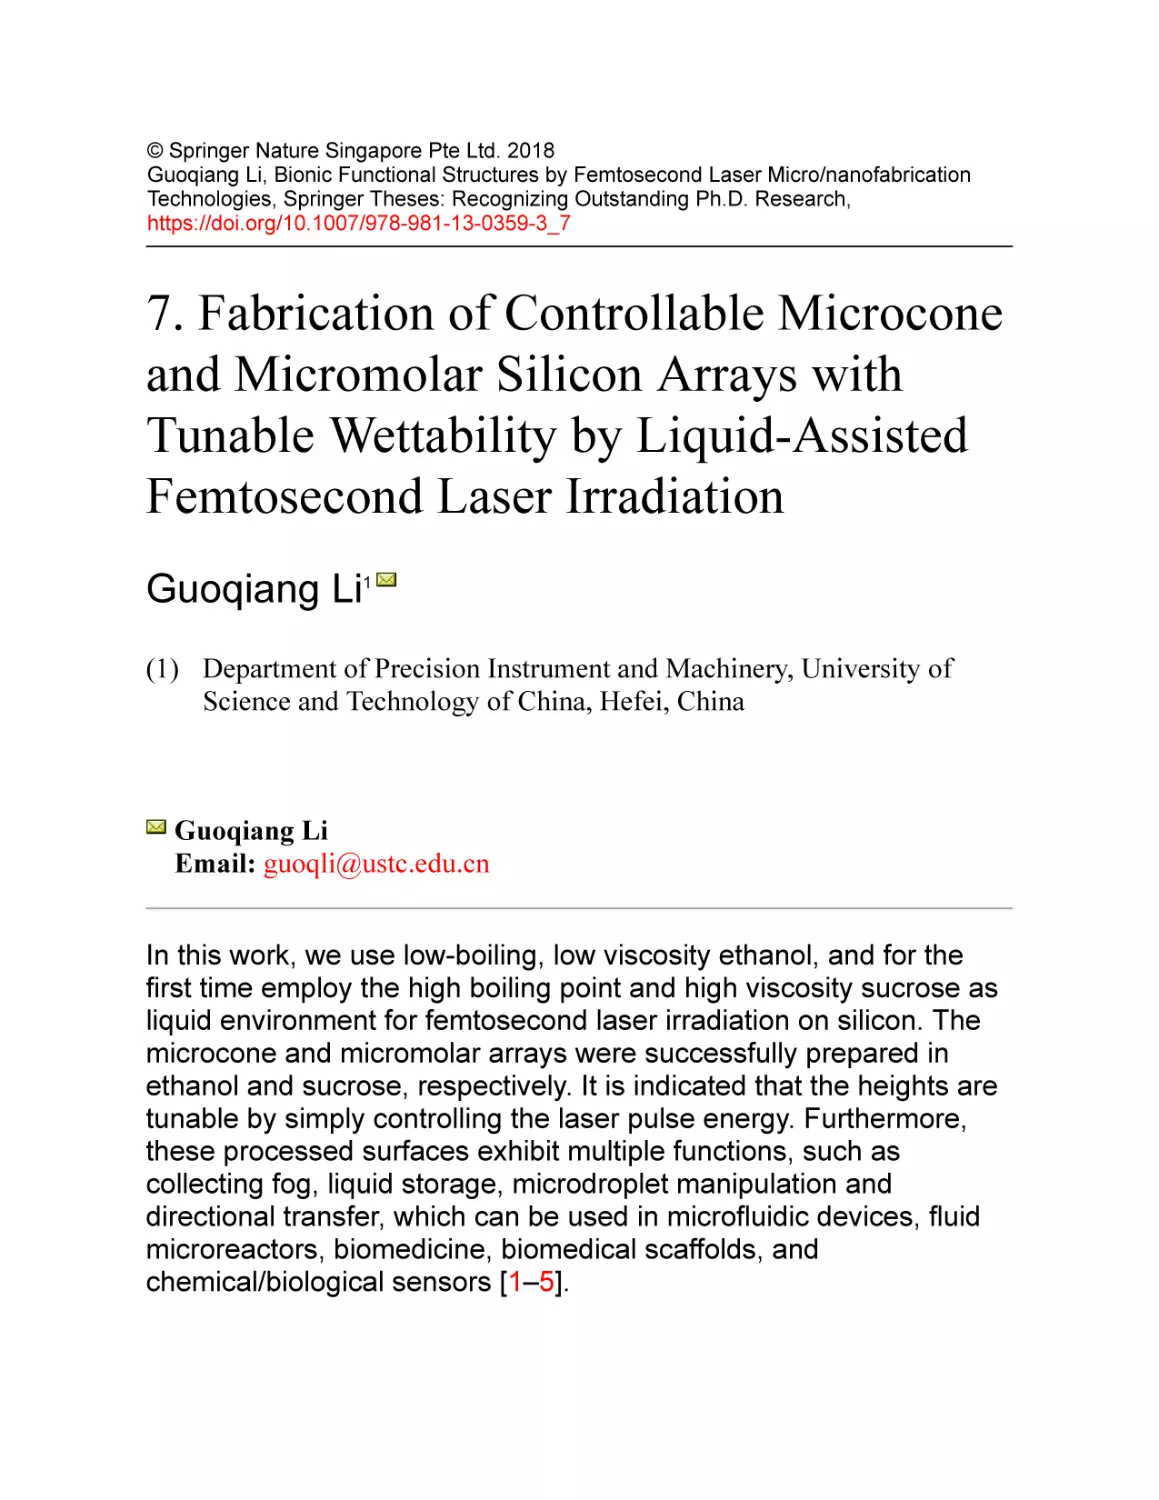 7. Fabrication of Controllable Microcone and Micromolar Silicon Arrays with Tunable Wettability by Liquid-Assisted Femtosecond Laser Irradiation